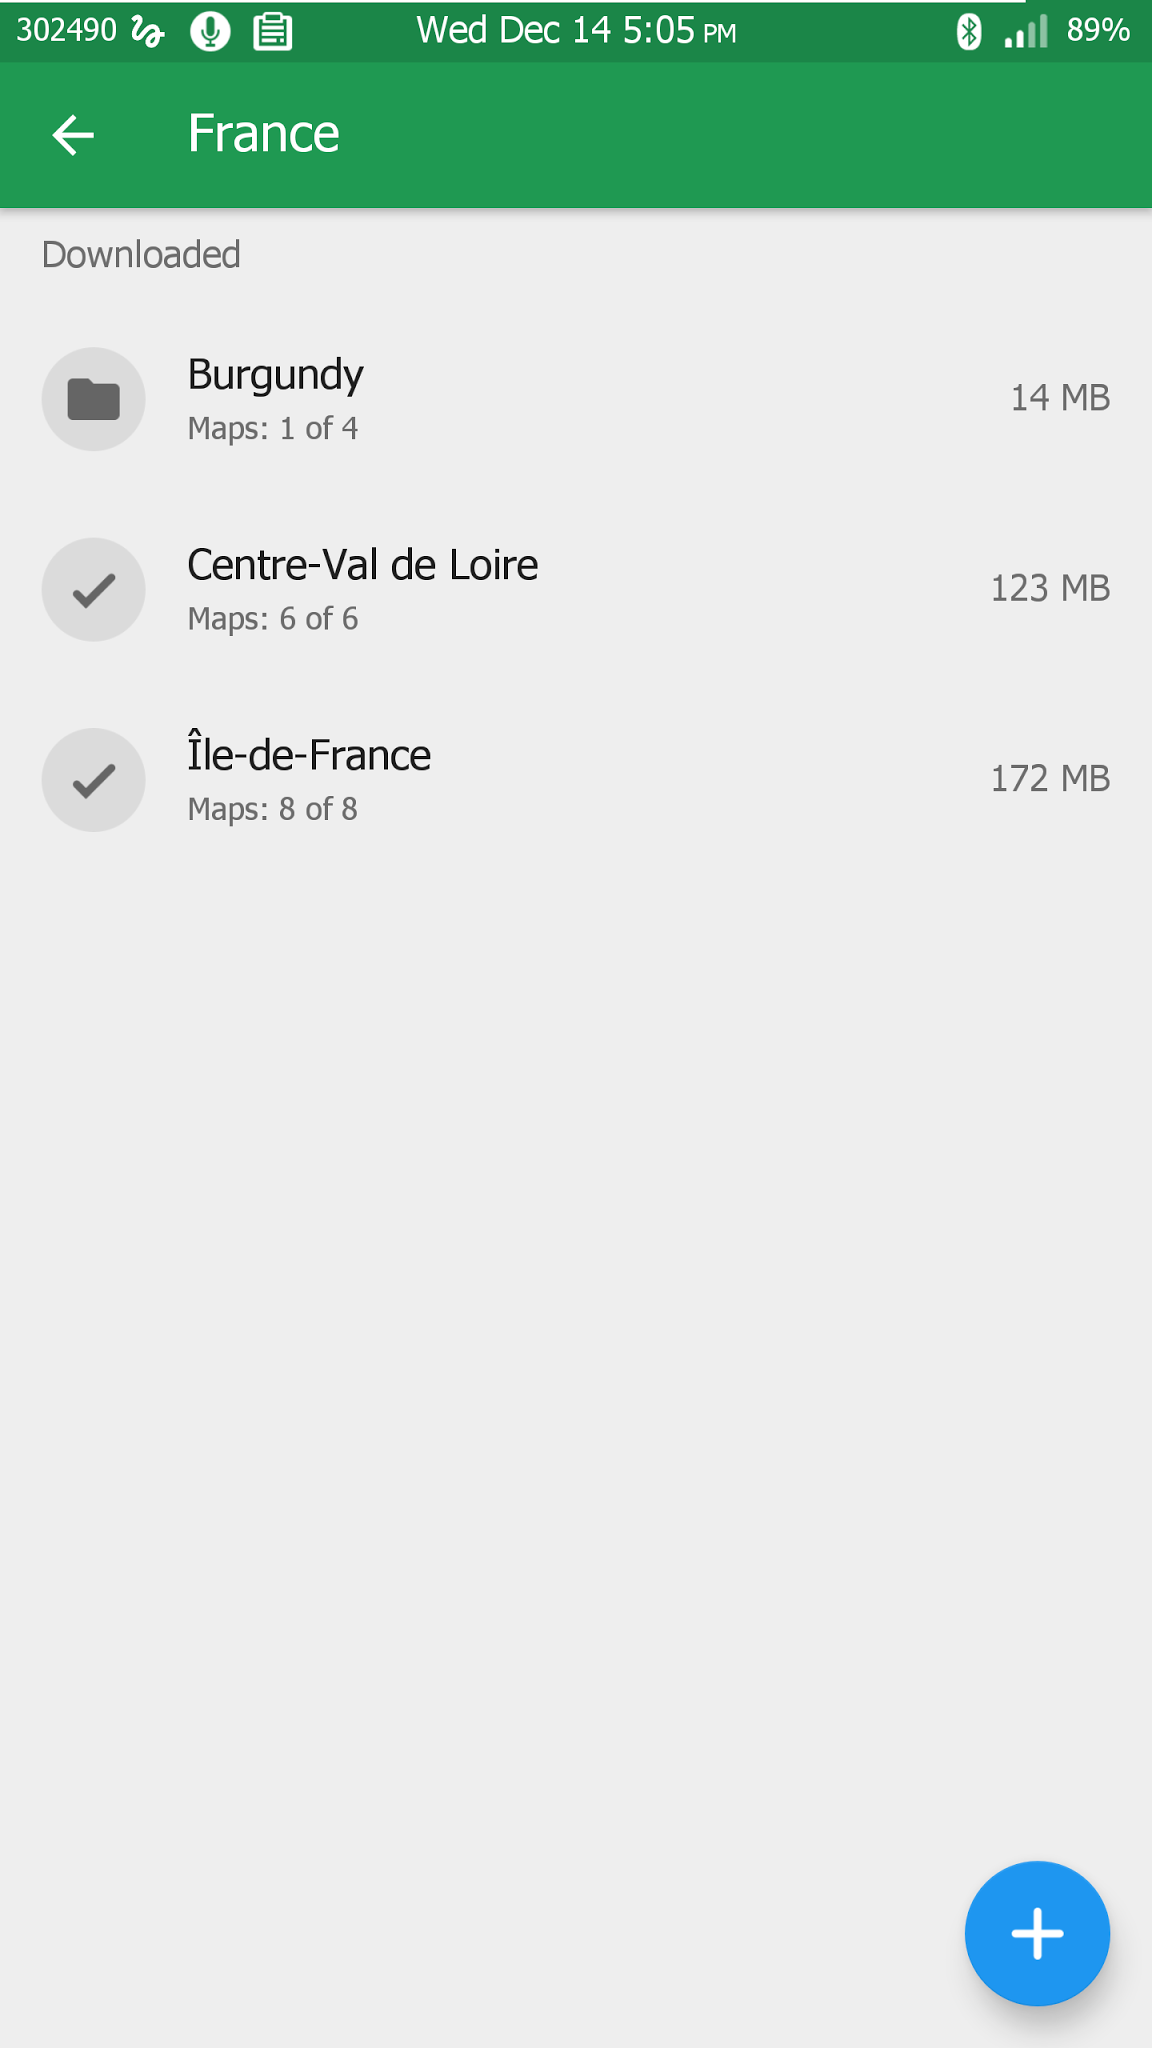 List of downloaded maps, with Paris taking up 172MB